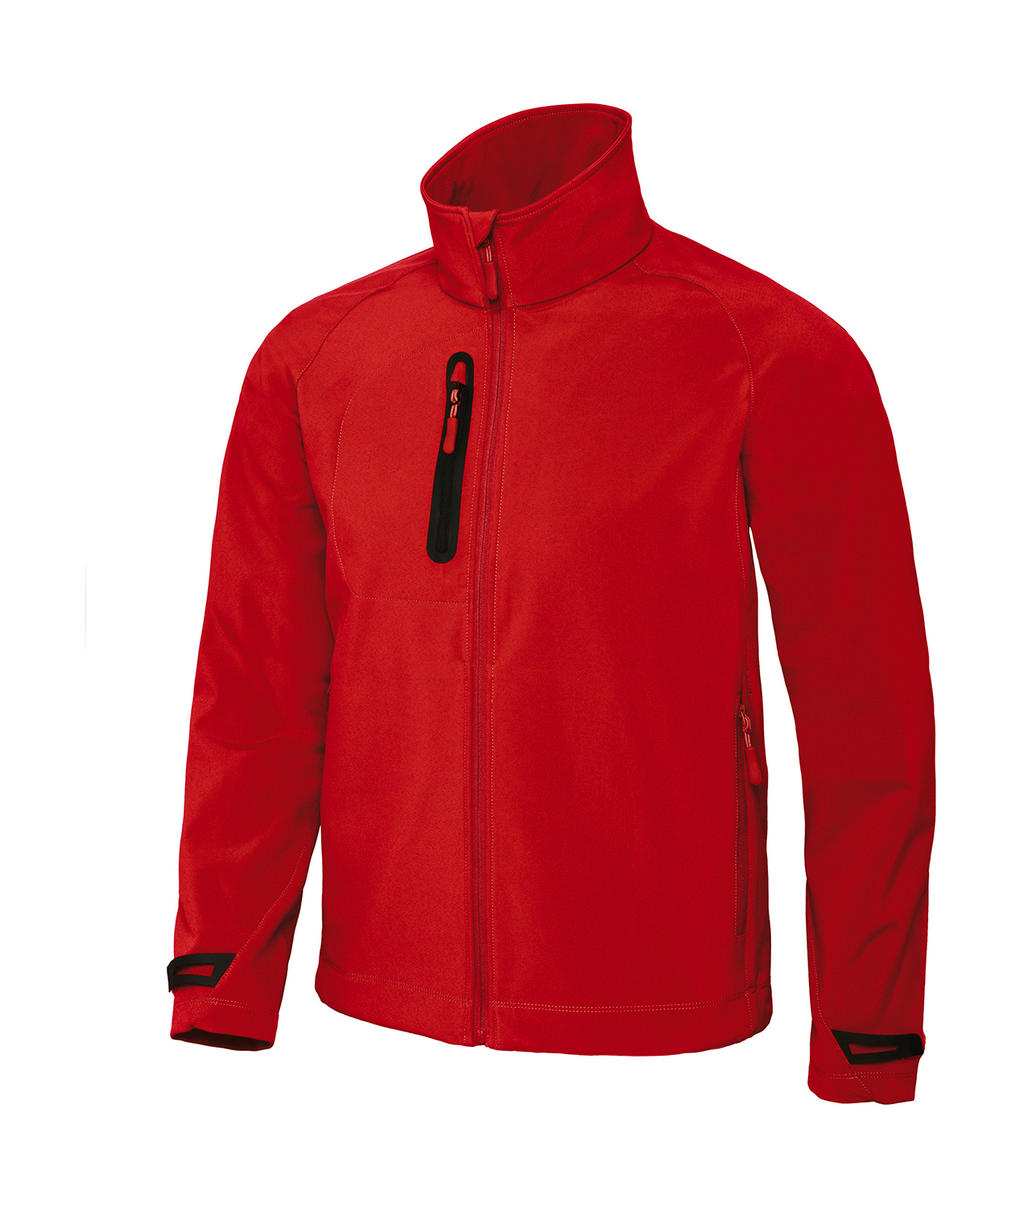  X-Lite Softshell/men Jacket in Farbe Deep Red